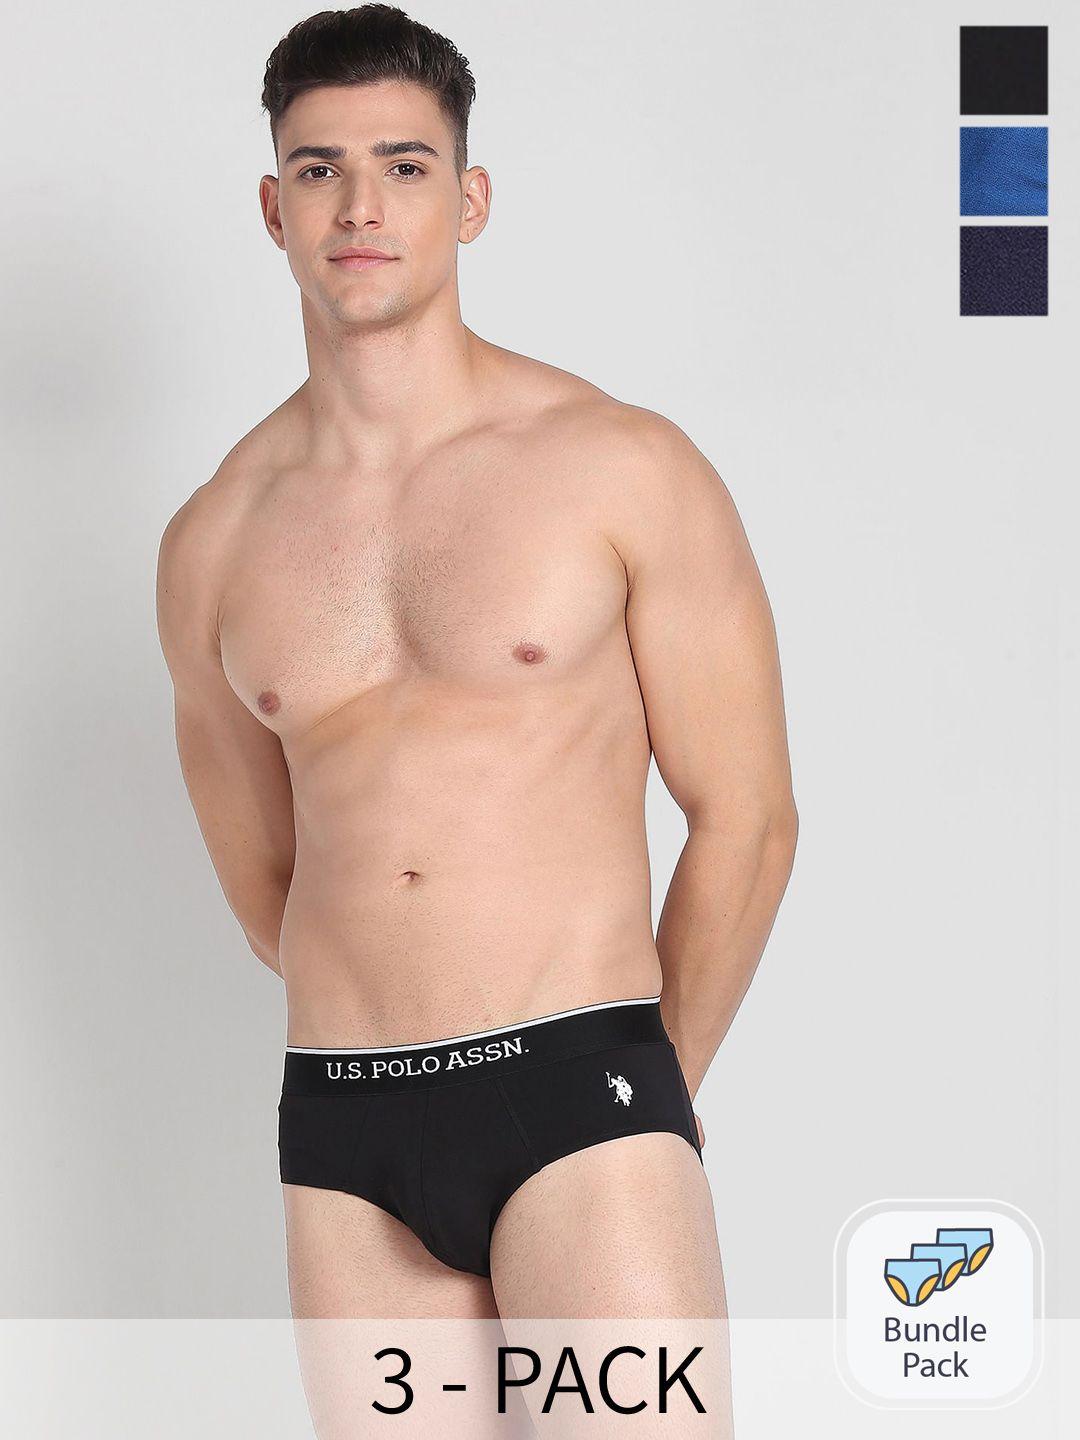 u.s. polo assn. pack of 3 mid-rise basic briefs eb004-zbn-p3